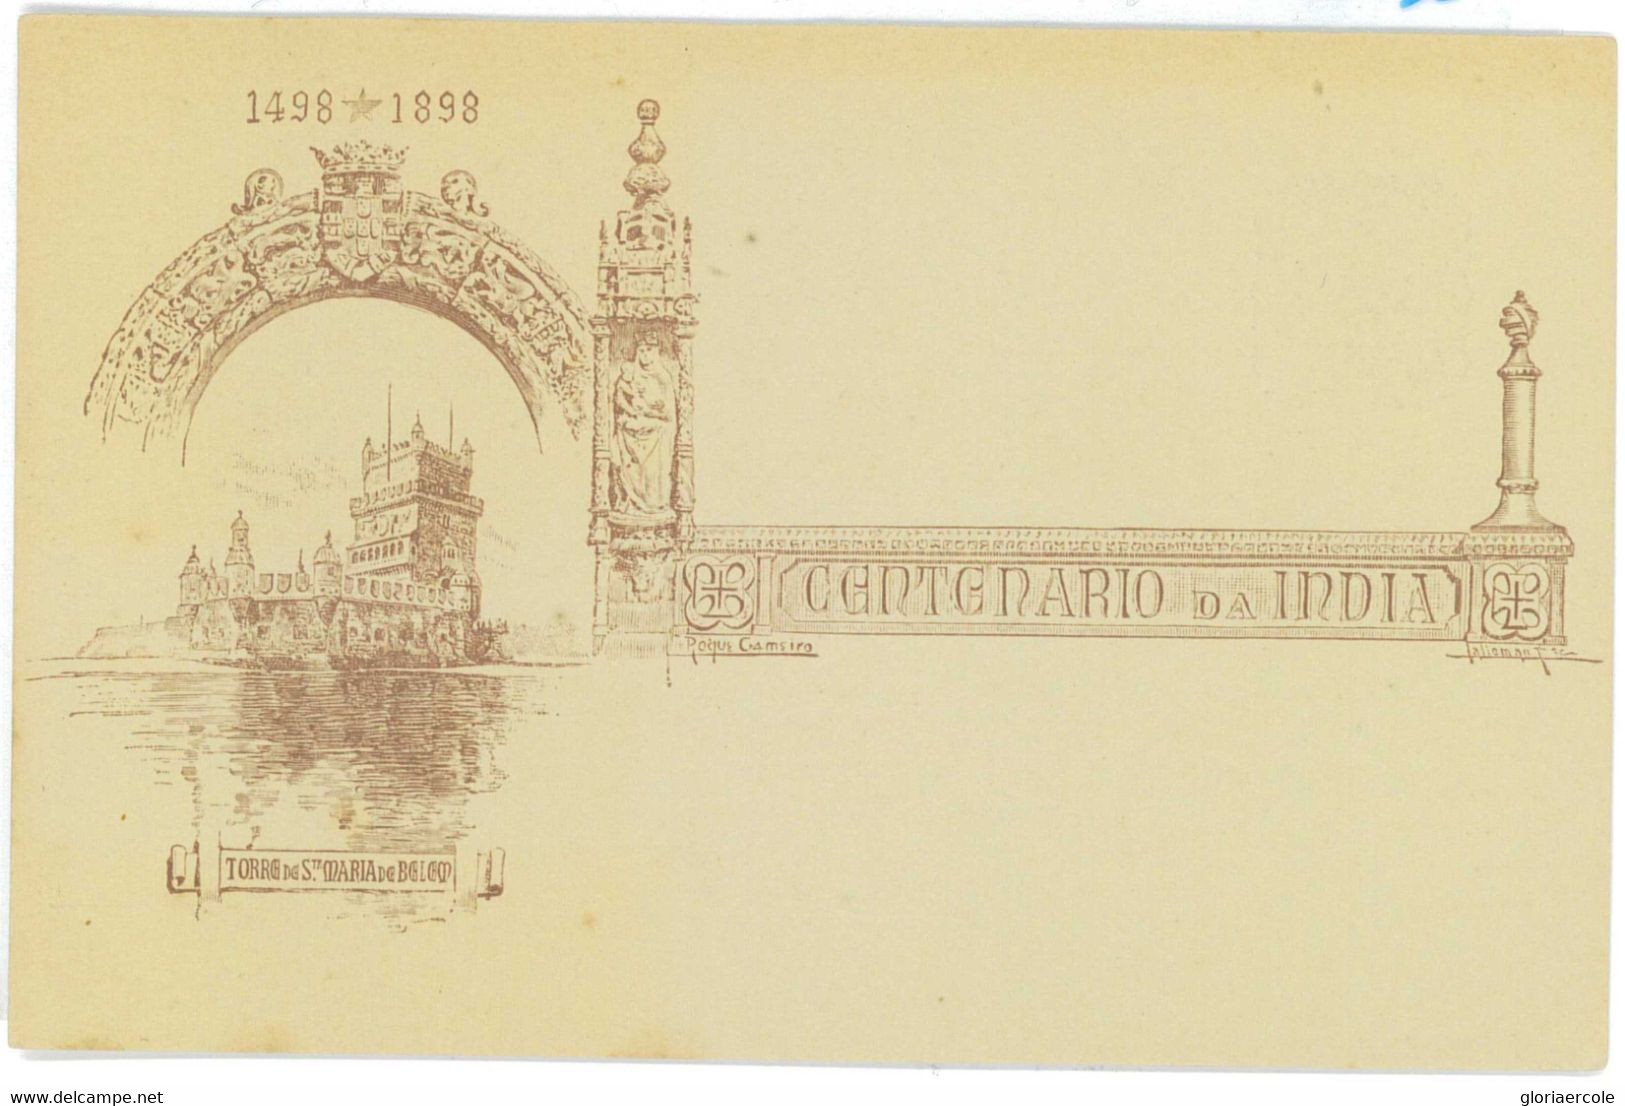 Aa6761b - MACAU Macao   POSTAL HISTORY - Stationery Card - ARCHIECTURE - Entiers Postaux